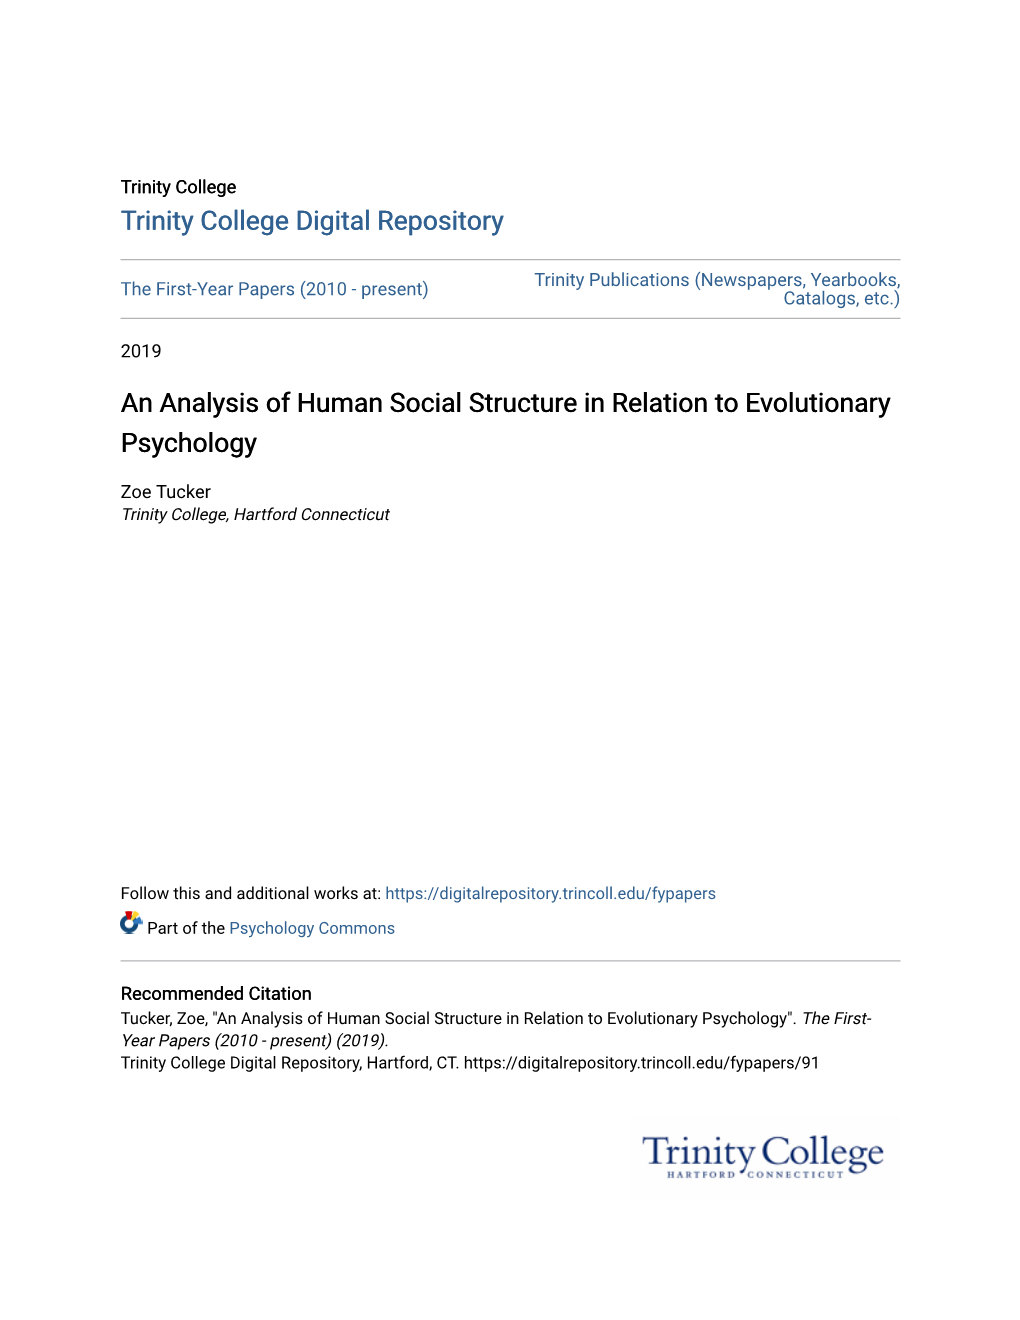 An Analysis of Human Social Structure in Relation to Evolutionary Psychology